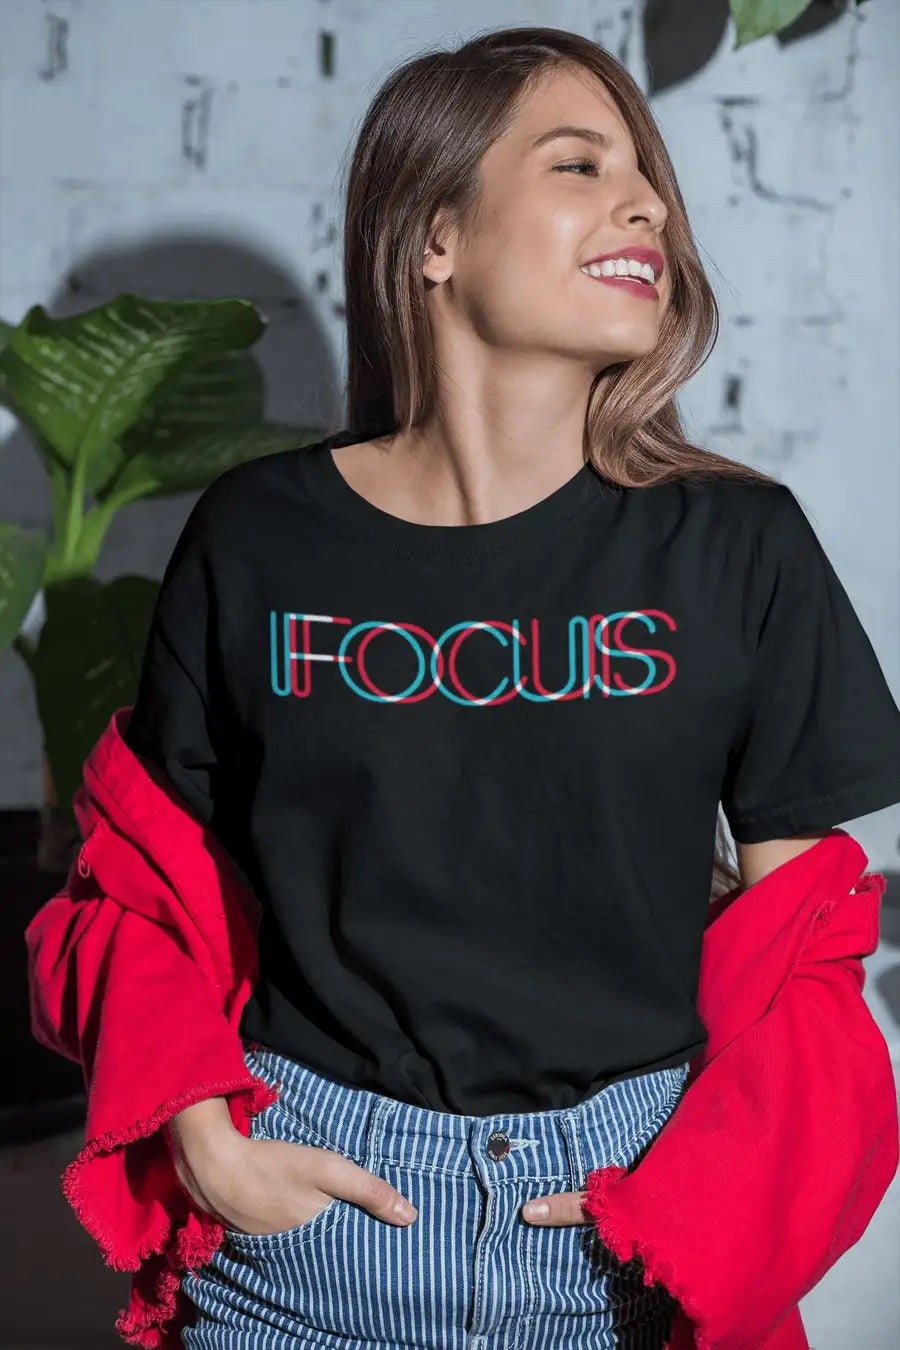 Focus Special 3D Effect Unisex T Shirt | Premium Design | Catch My Drift India - Catch My Drift India Clothing black, clothing, dentist, engineer, engineering, general, gym, made in india, sh